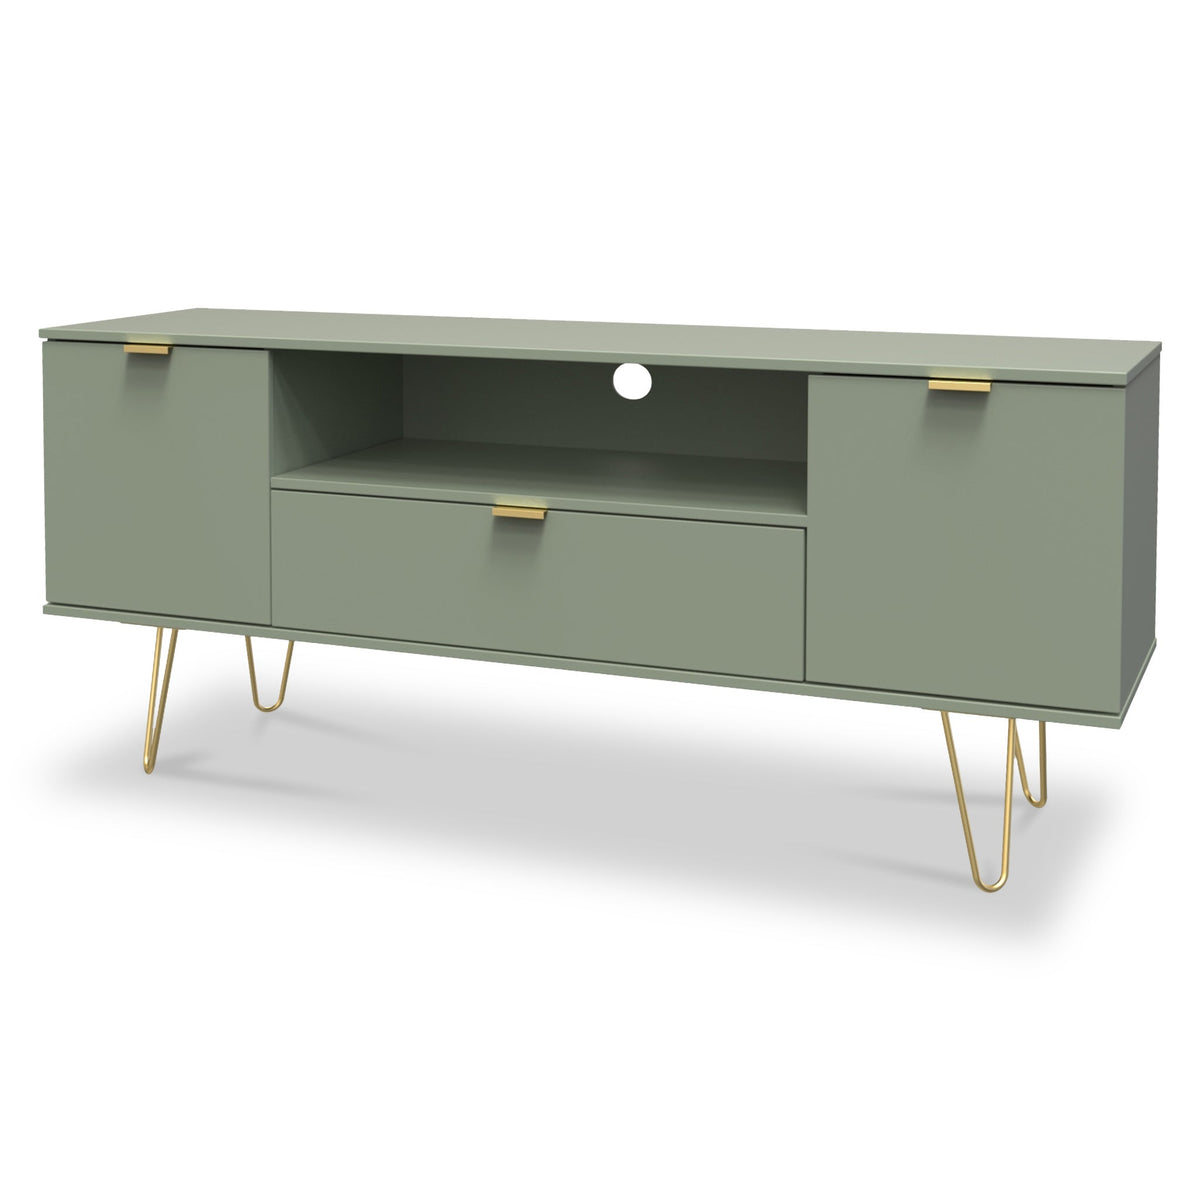 Moreno Olive Green 2 Door 1 Drawer Large TV Stand with Gold Hairpin Legs